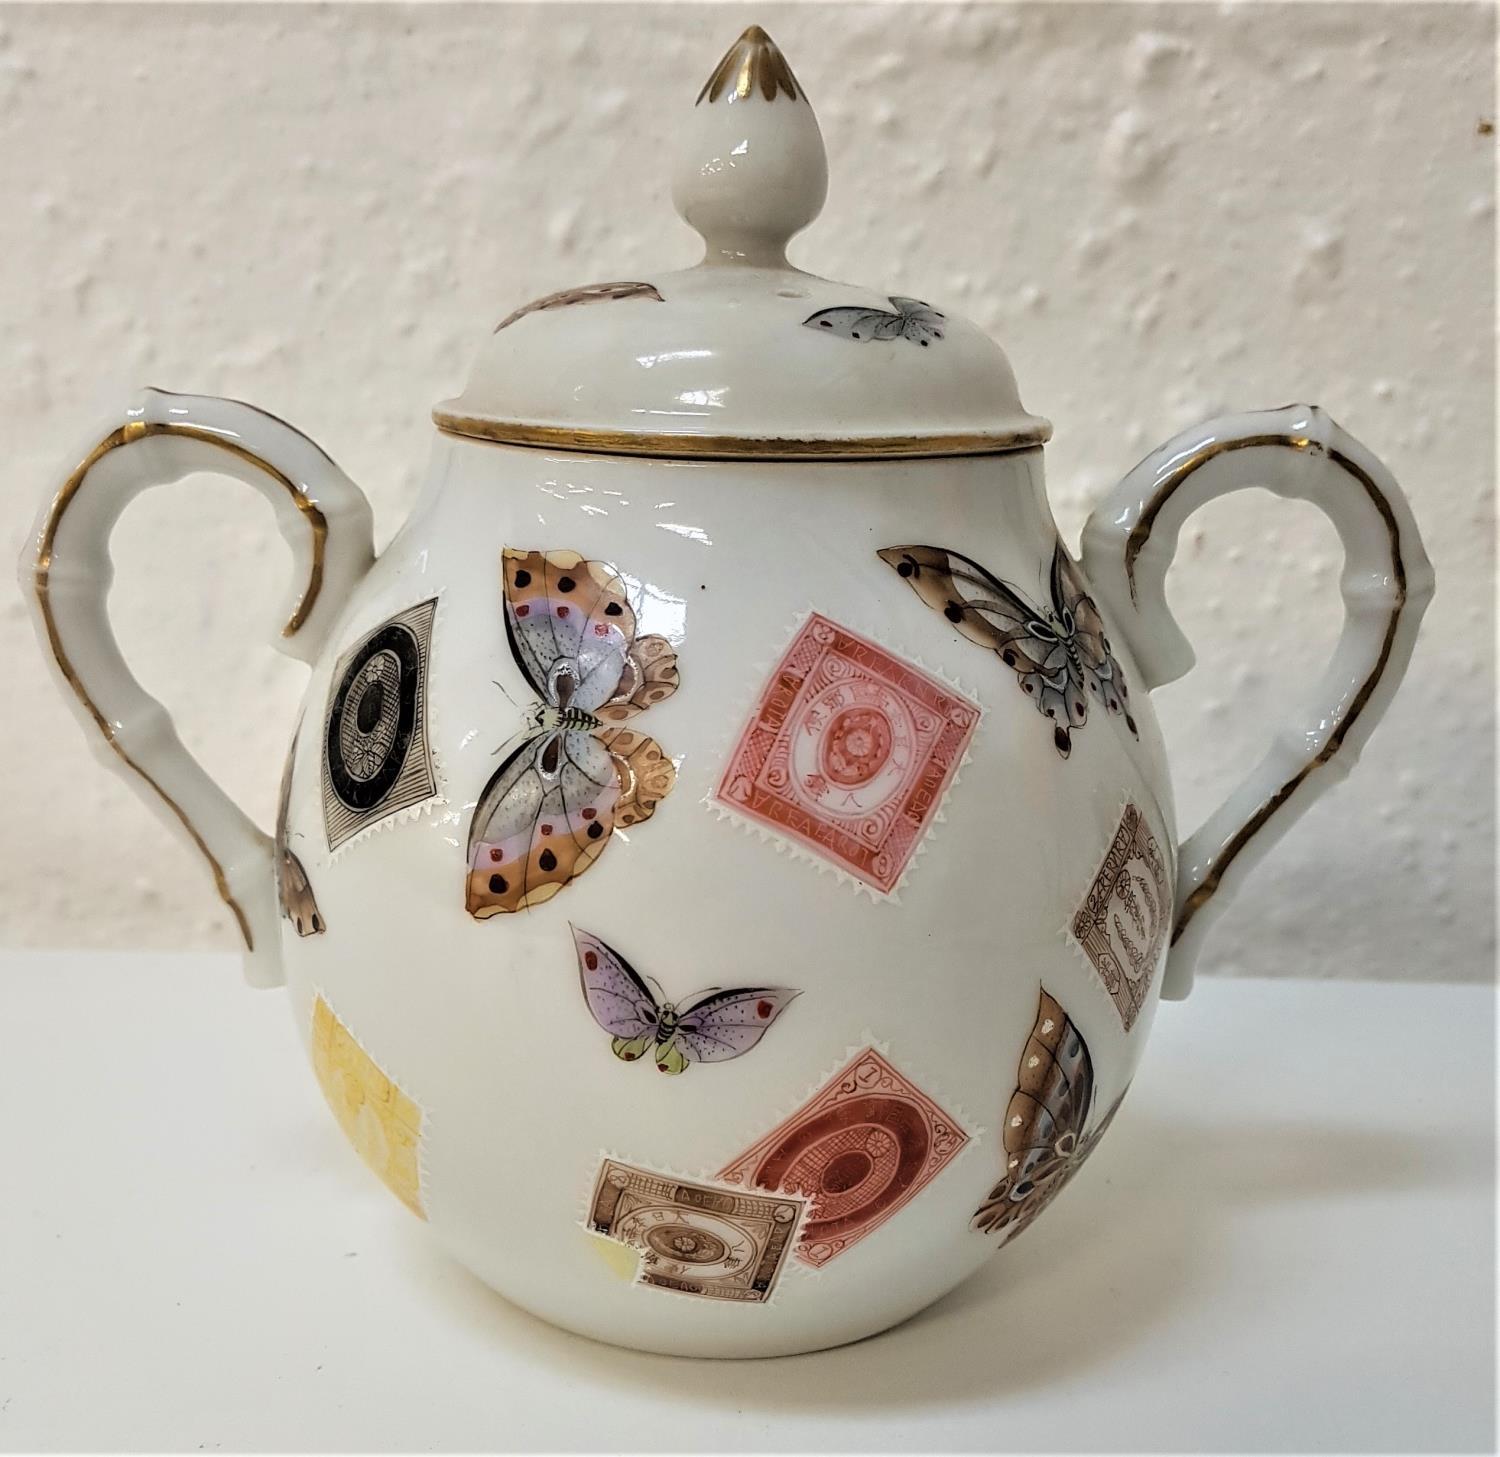 JAPANESE PORCELAIN LIDDED SUGAR BOWL with simulated bamboo handles, the lid and body decorated